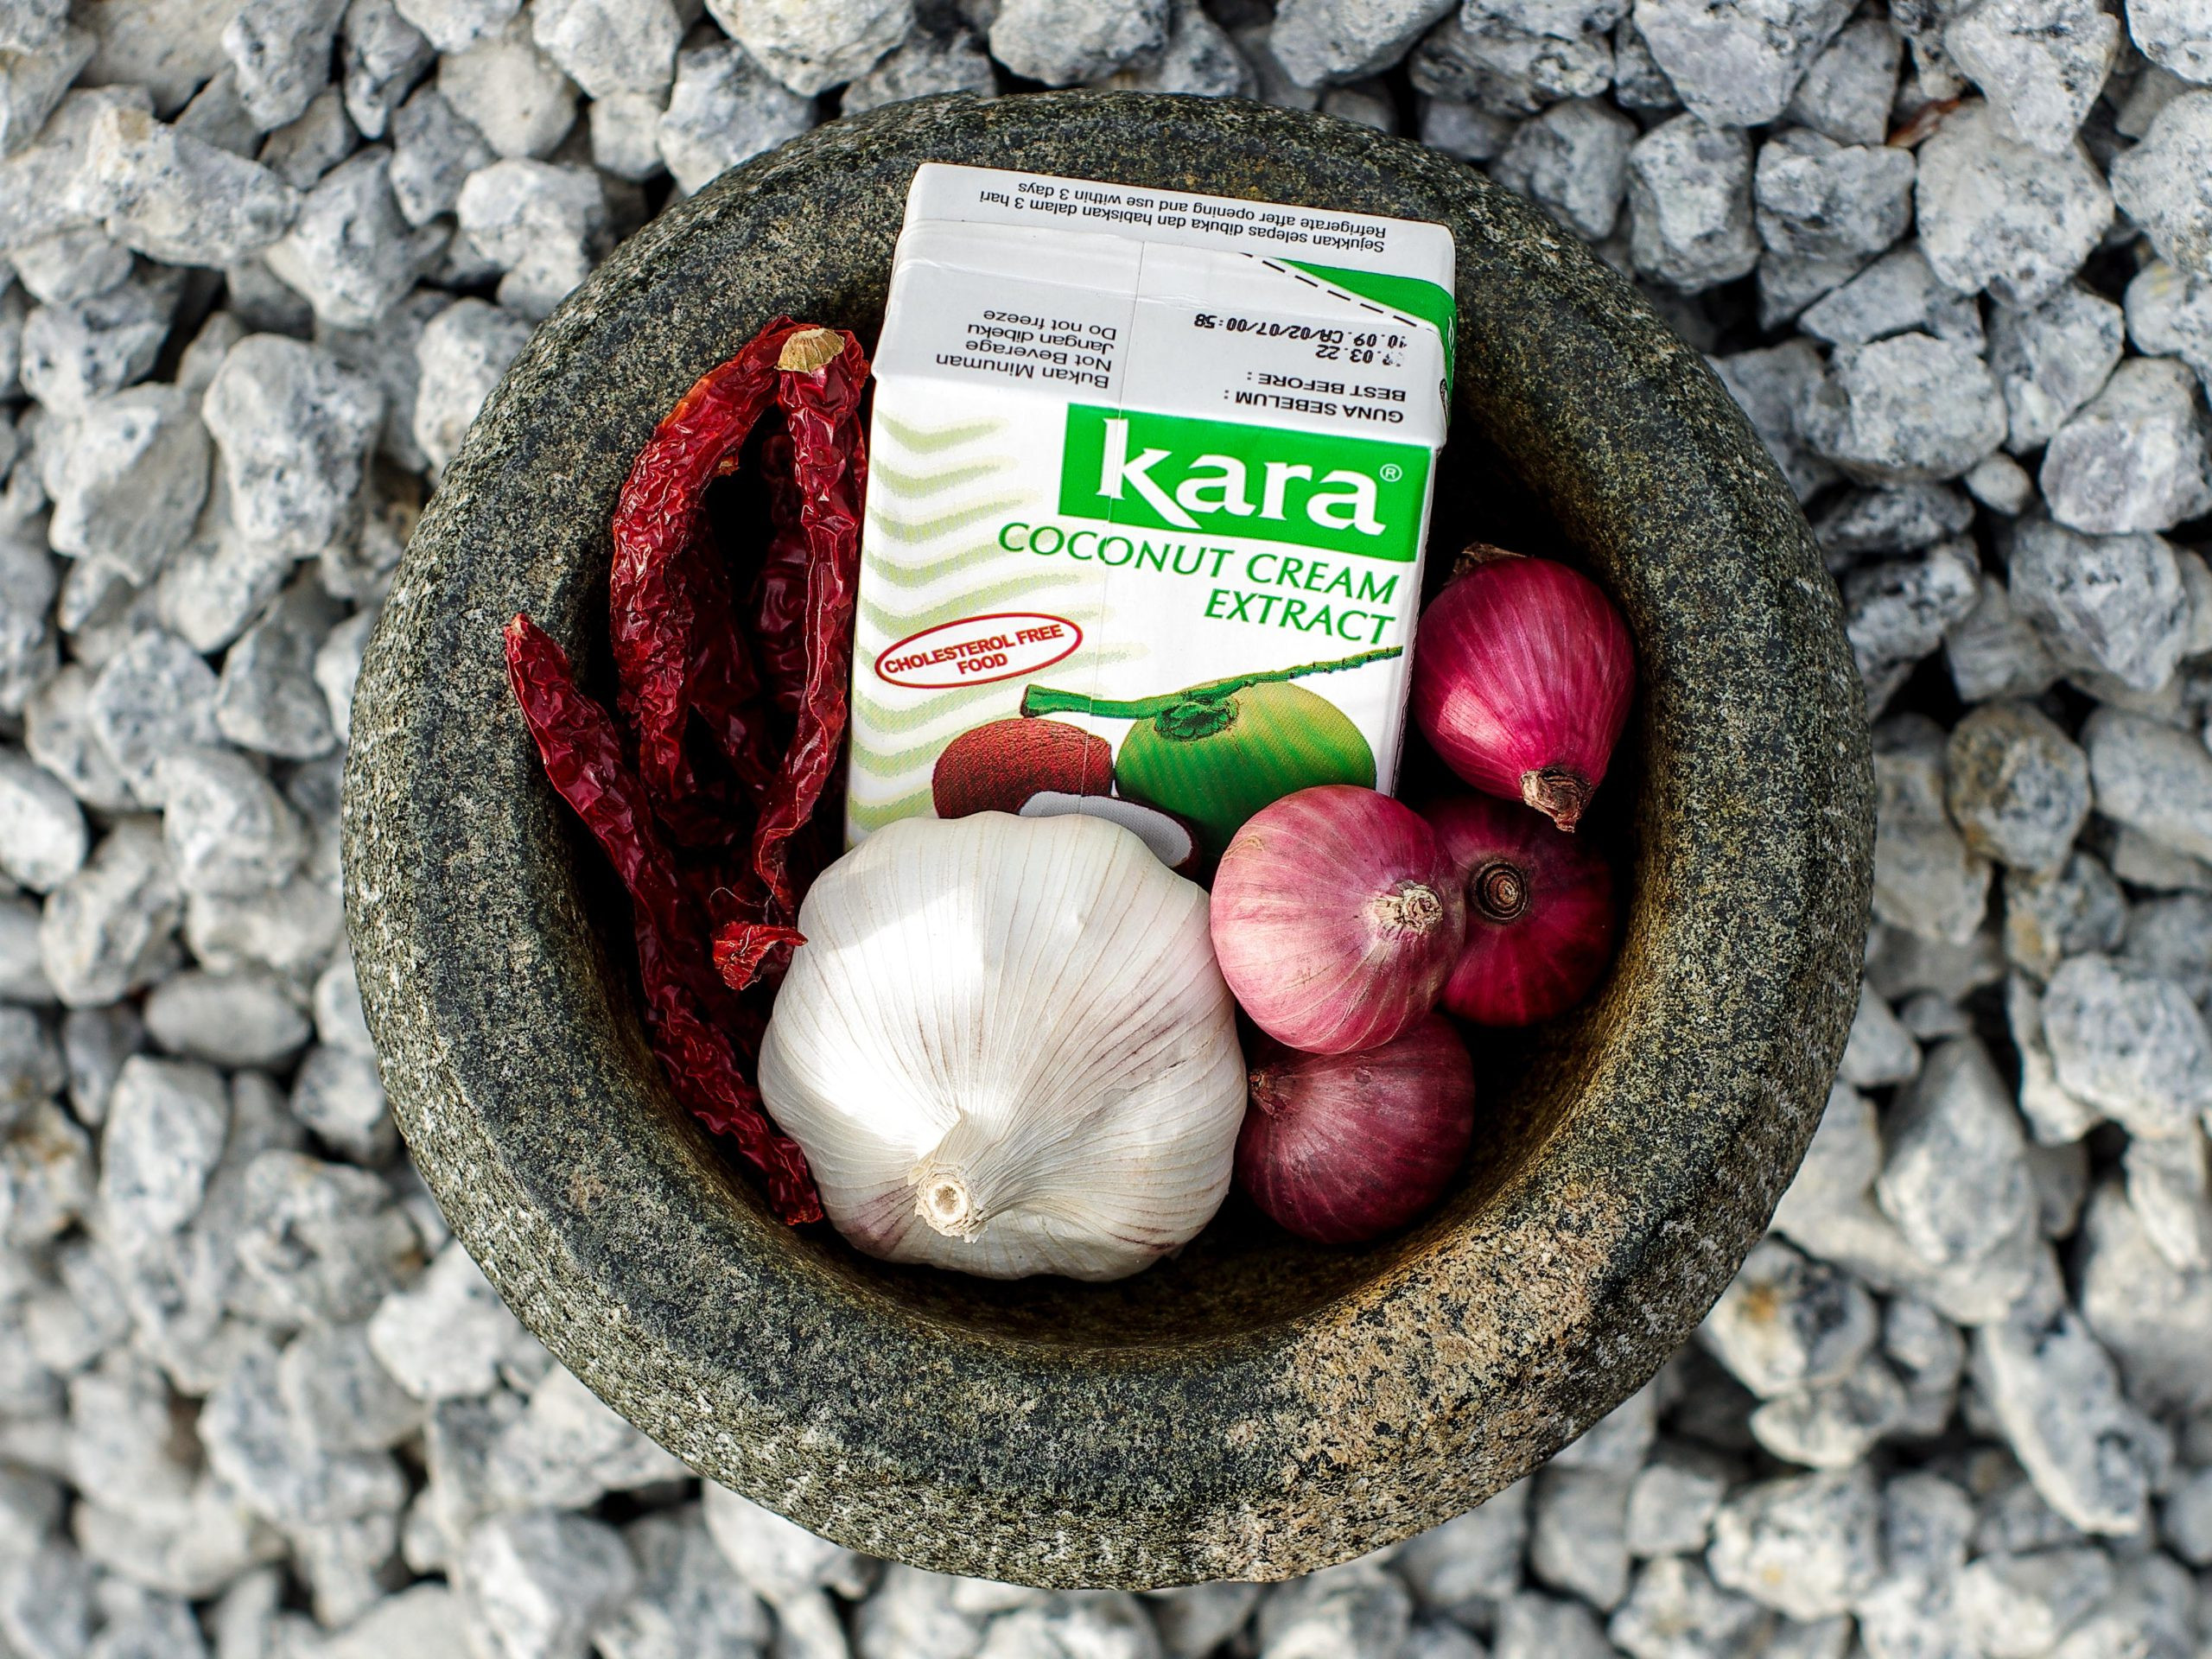 A mortar sits on gravel. In the mortar bowl is a box of Kara brand coconut milk, a bulb of garlic, dried chillies, and shallots.